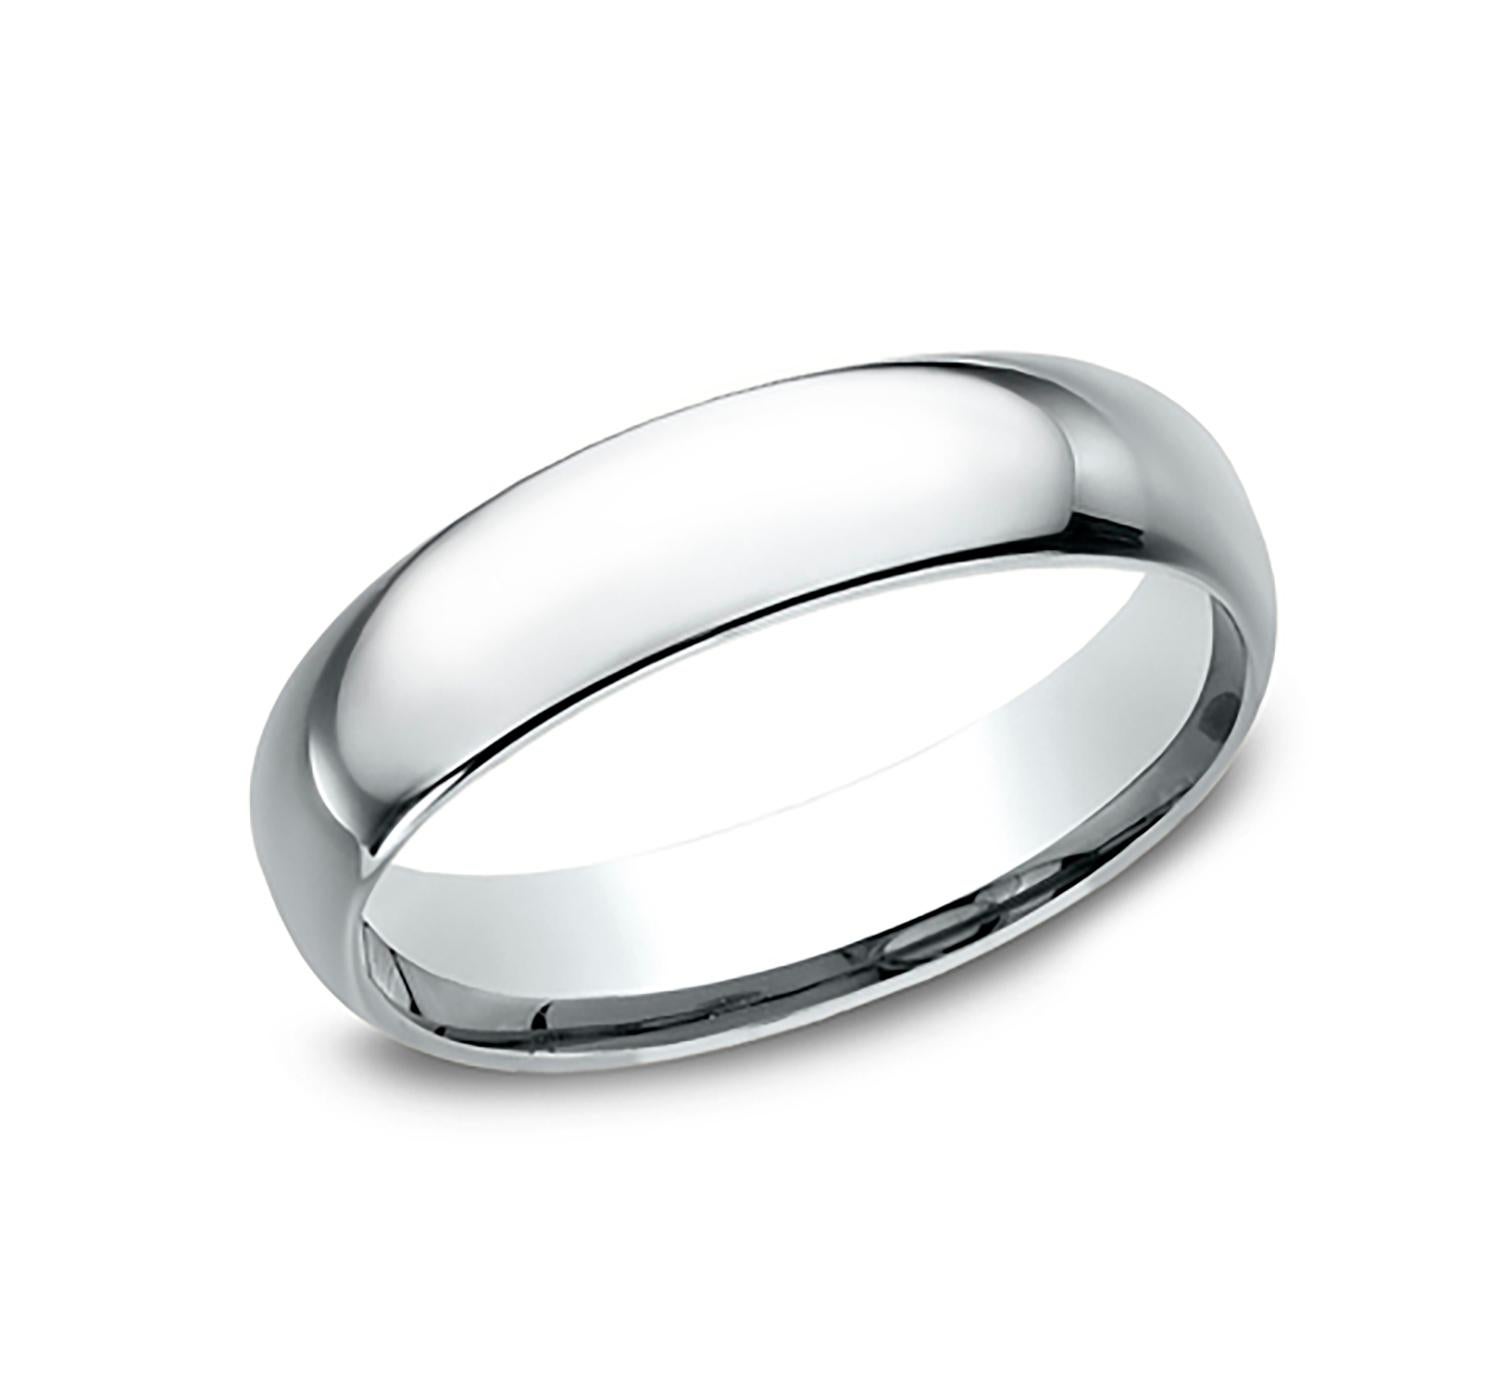 Benchmark wedding band in 14K white gold polished finish. Width 5mm, high dome comfort fit. Custom engraving and finishing available. Size 11 US and resizable upon request. Available in 1/4, 1/2, and 3/4 sizes, for more information please message us